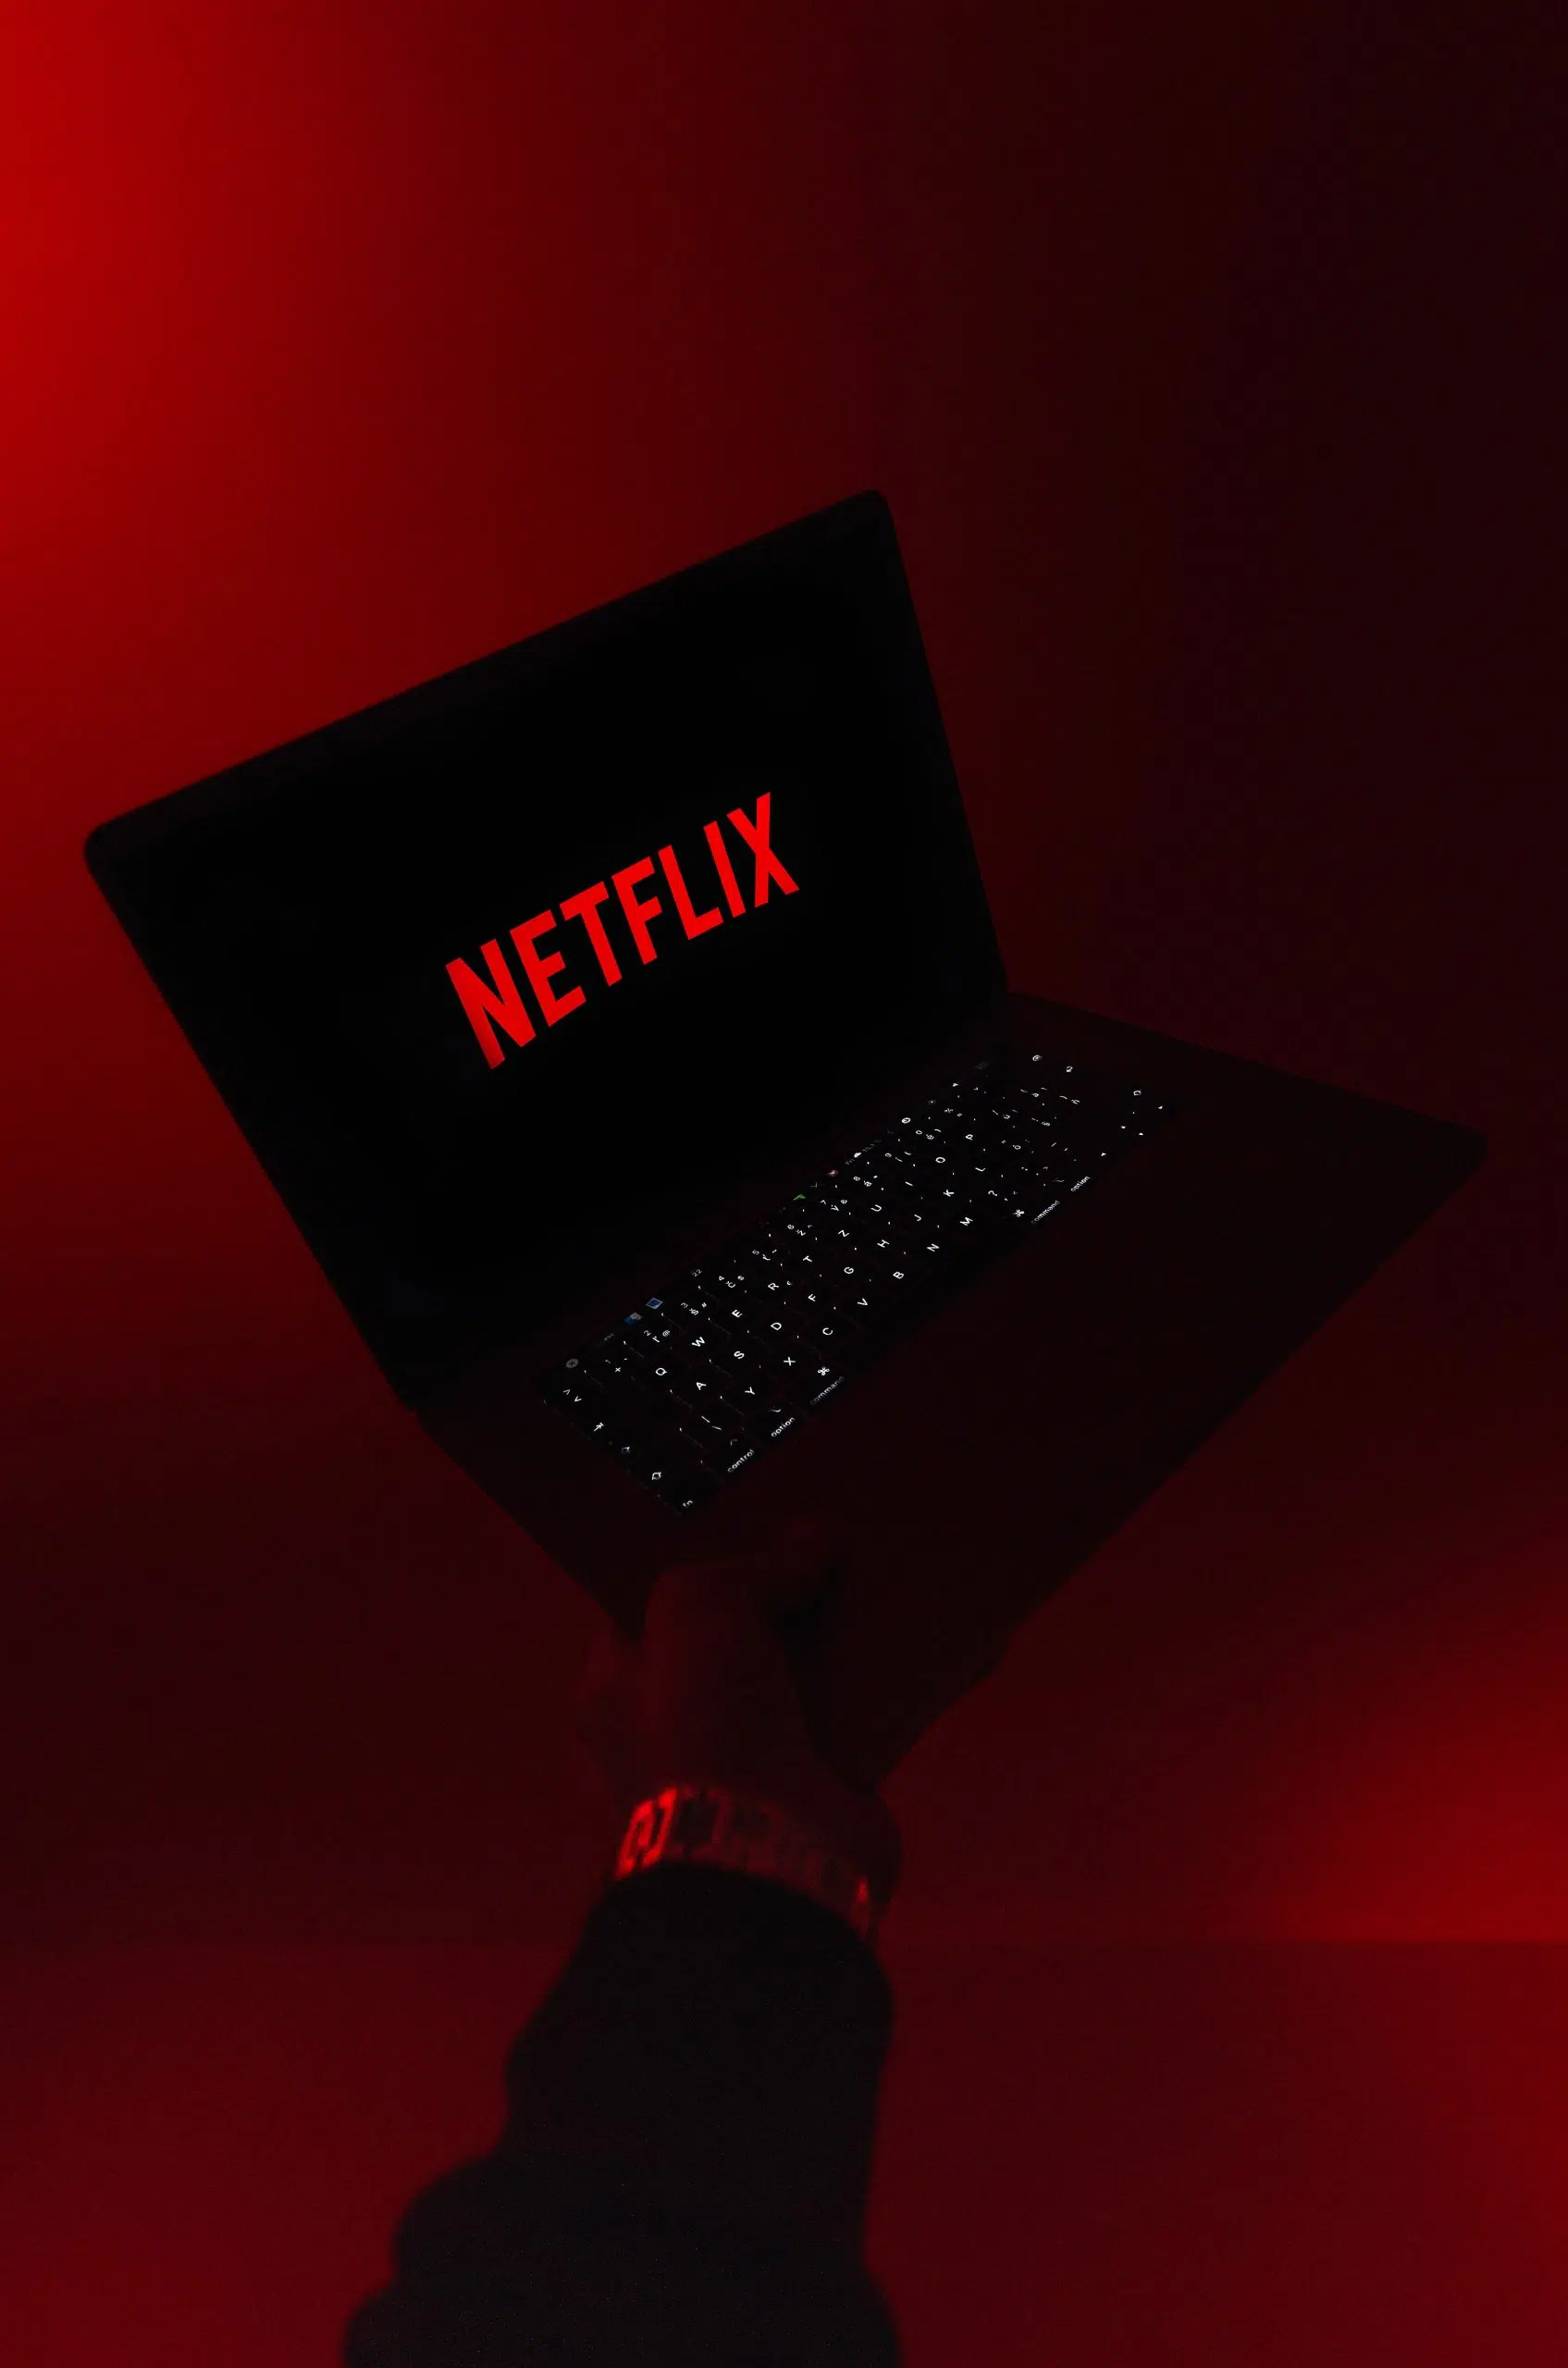 Netflix to crack down on password sharing